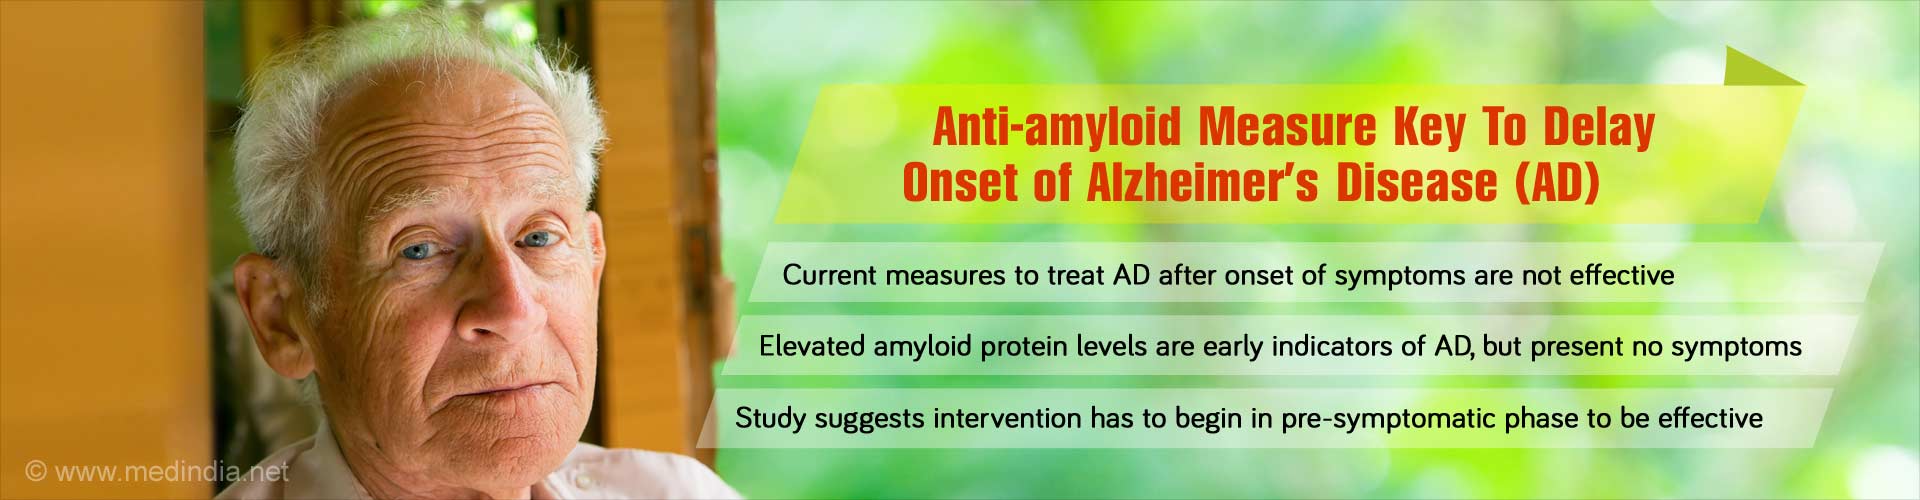 Anti-amlyloid measures key to delaying onset of Alzheimer's Disease (AD)
- Current measures to treat AD after onset of symptoms are not effective
- Elevated amlyloid protein levels are early indicators of AD, but present no symptoms
- Study suggests intervention has to begin in pre-symptomatic phase to be effective